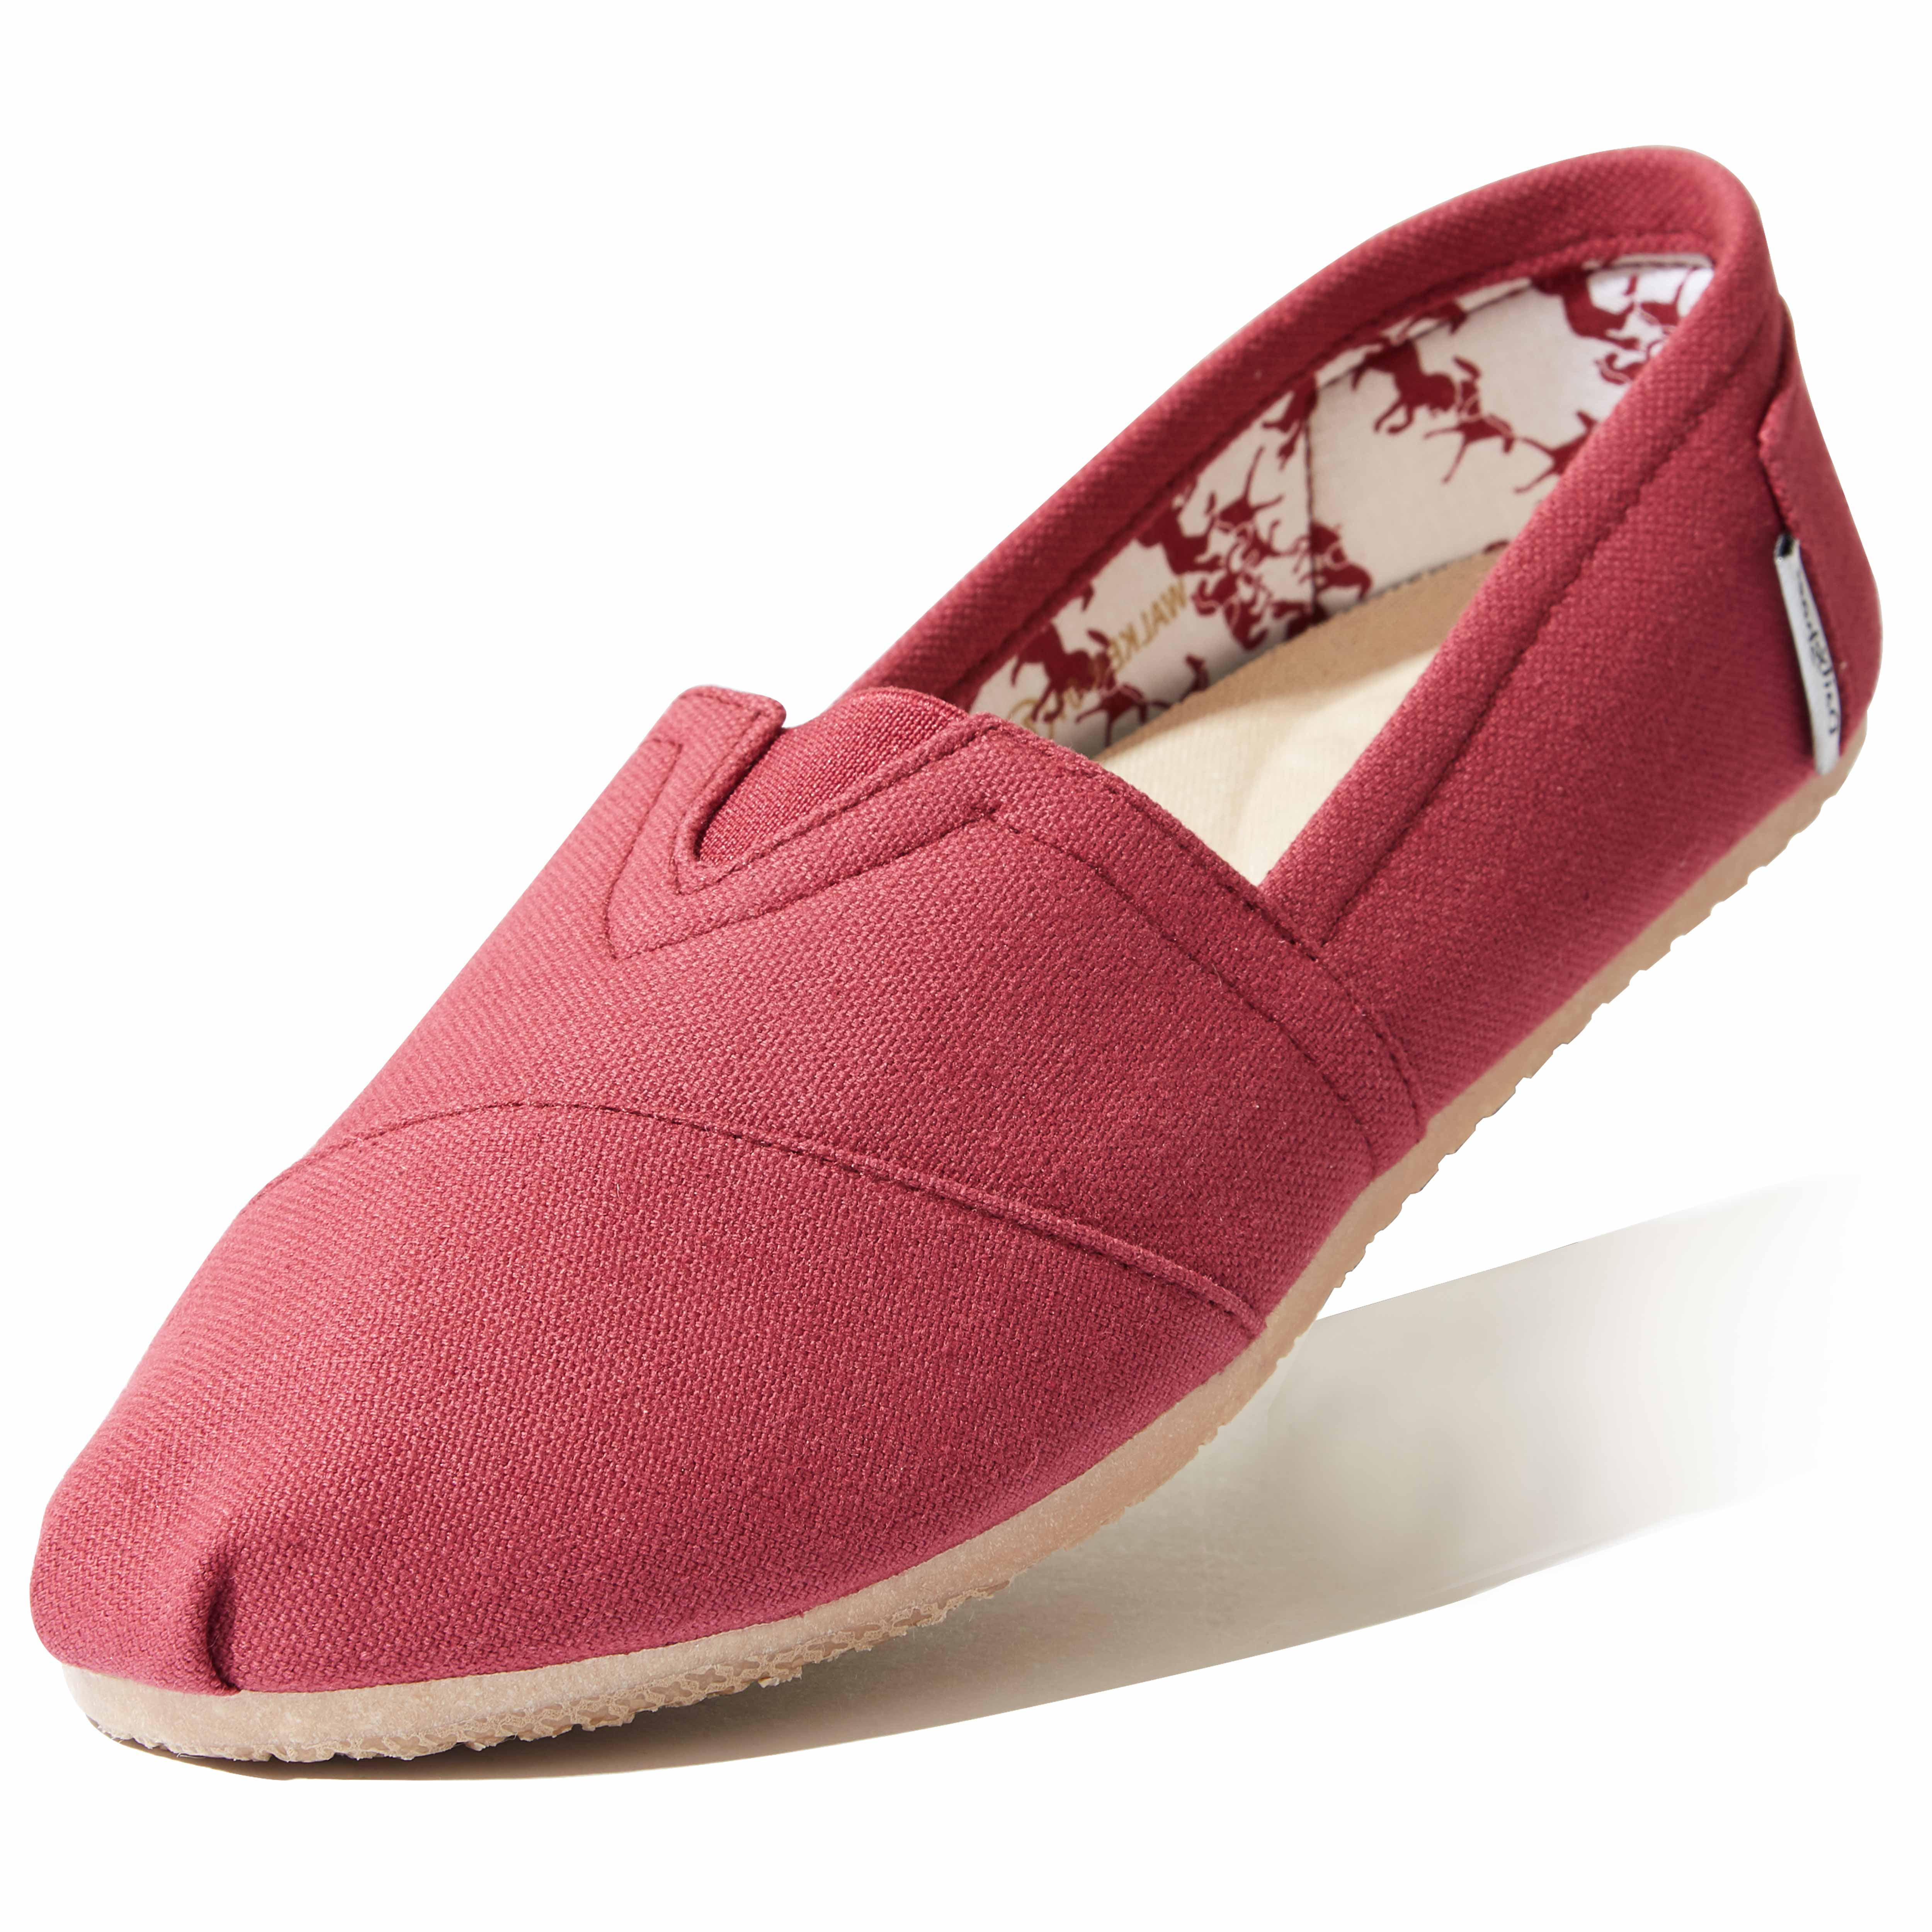 Women's Super Cute Canvas Flat Slip On Loafer Ballerina Red Shoes One Line 